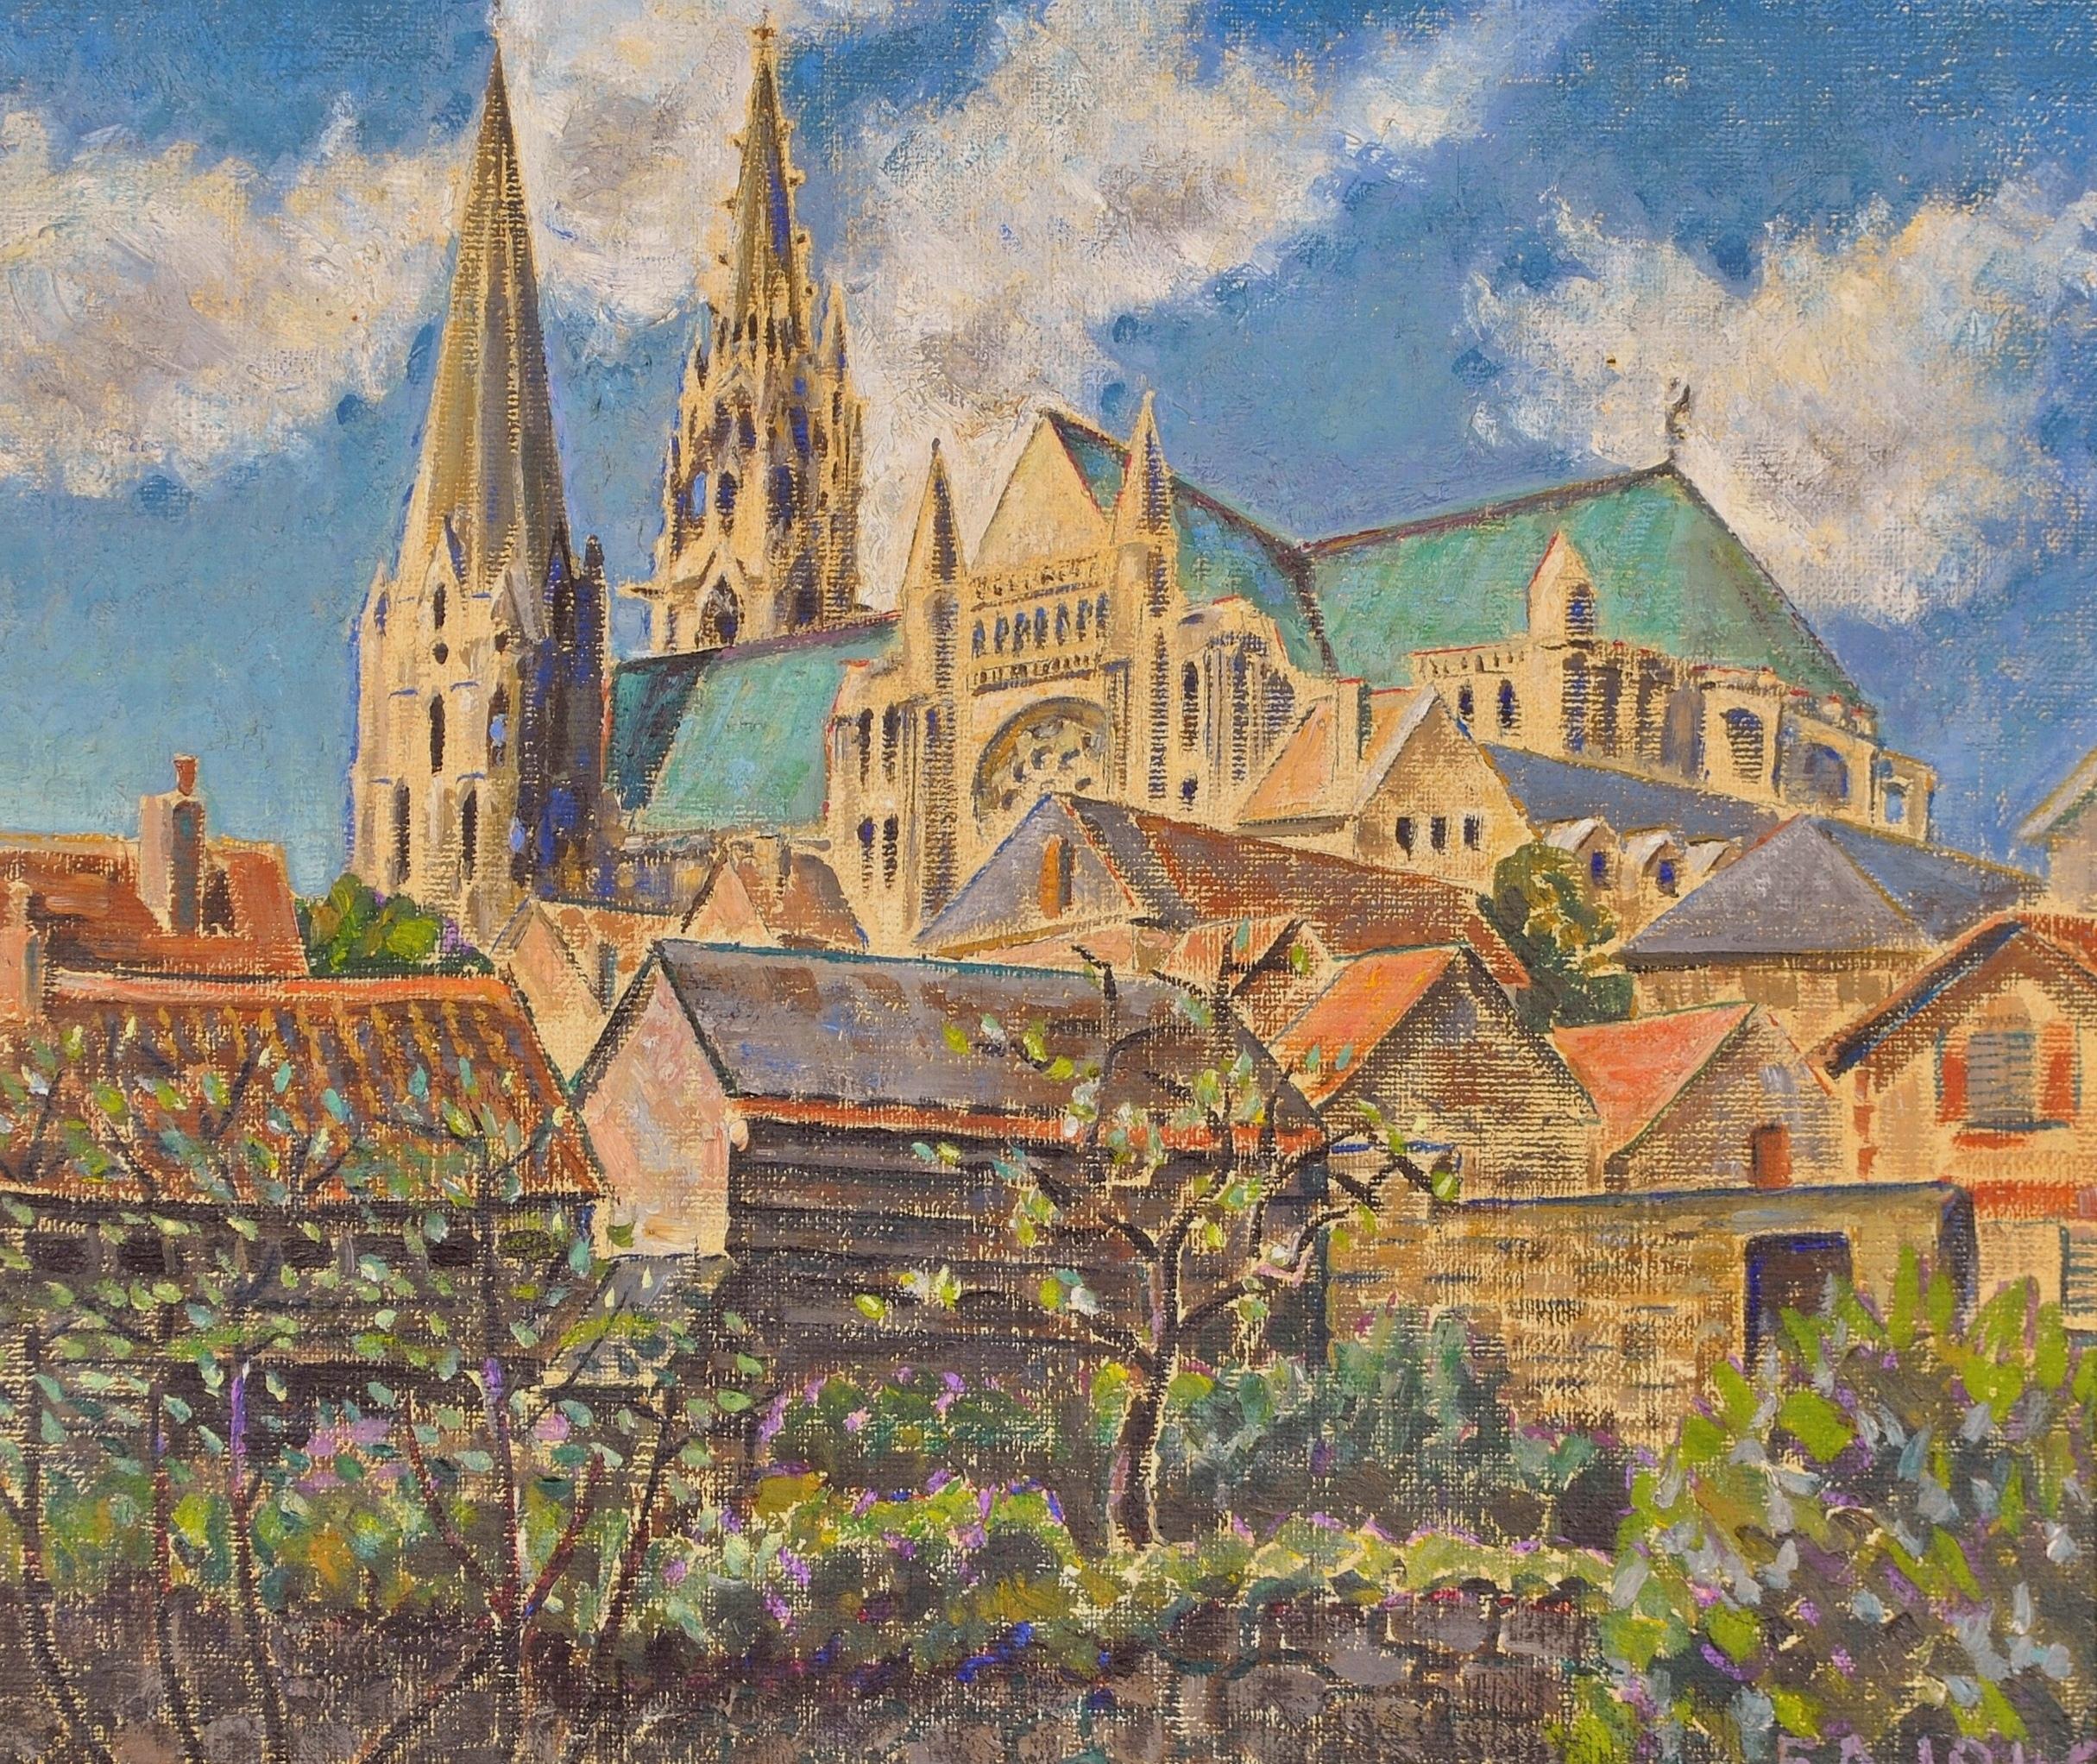 A beautiful signed and dated 1940 impressionist oil on canvas depicting the city Chartres in northern France with it's famous cathedral, by Faith Ashford.

The work has a wonderful provenance, having been exhibited at the Royal Academy and